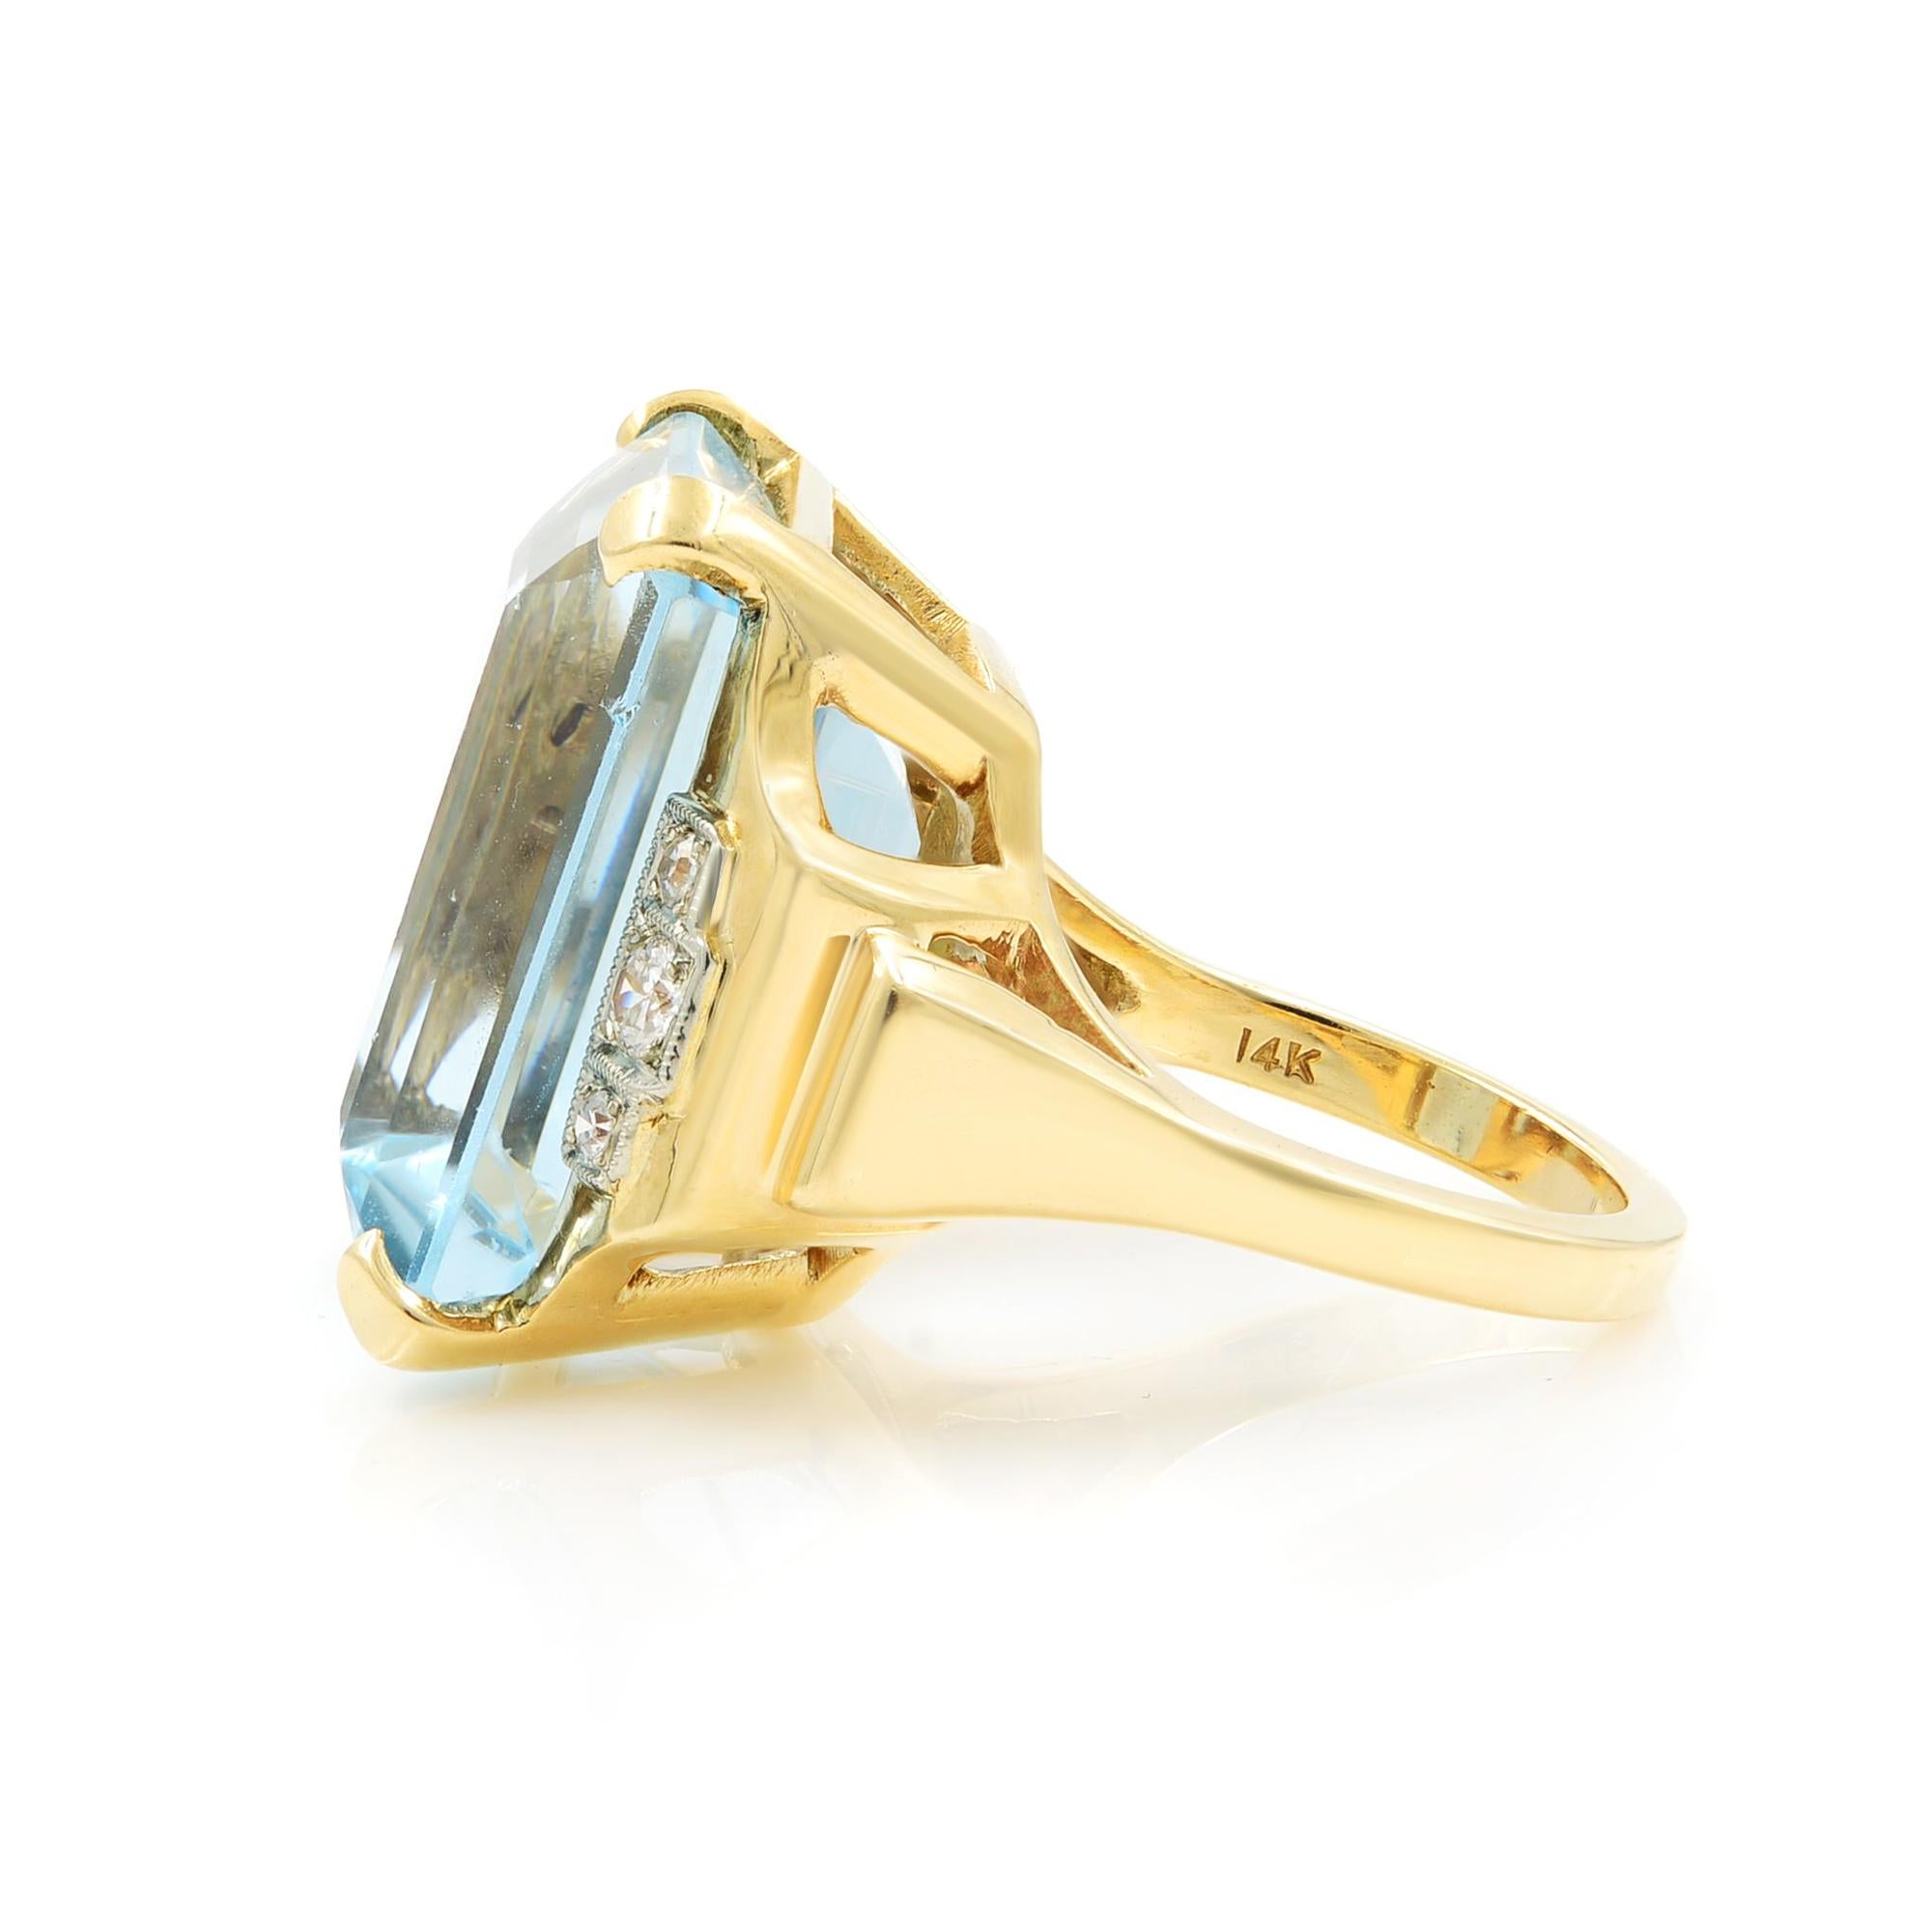 Modern Large Emerald Cut Aquamarineand Diamond Ring 23.76Cts 14K Yellow Gold For Sale